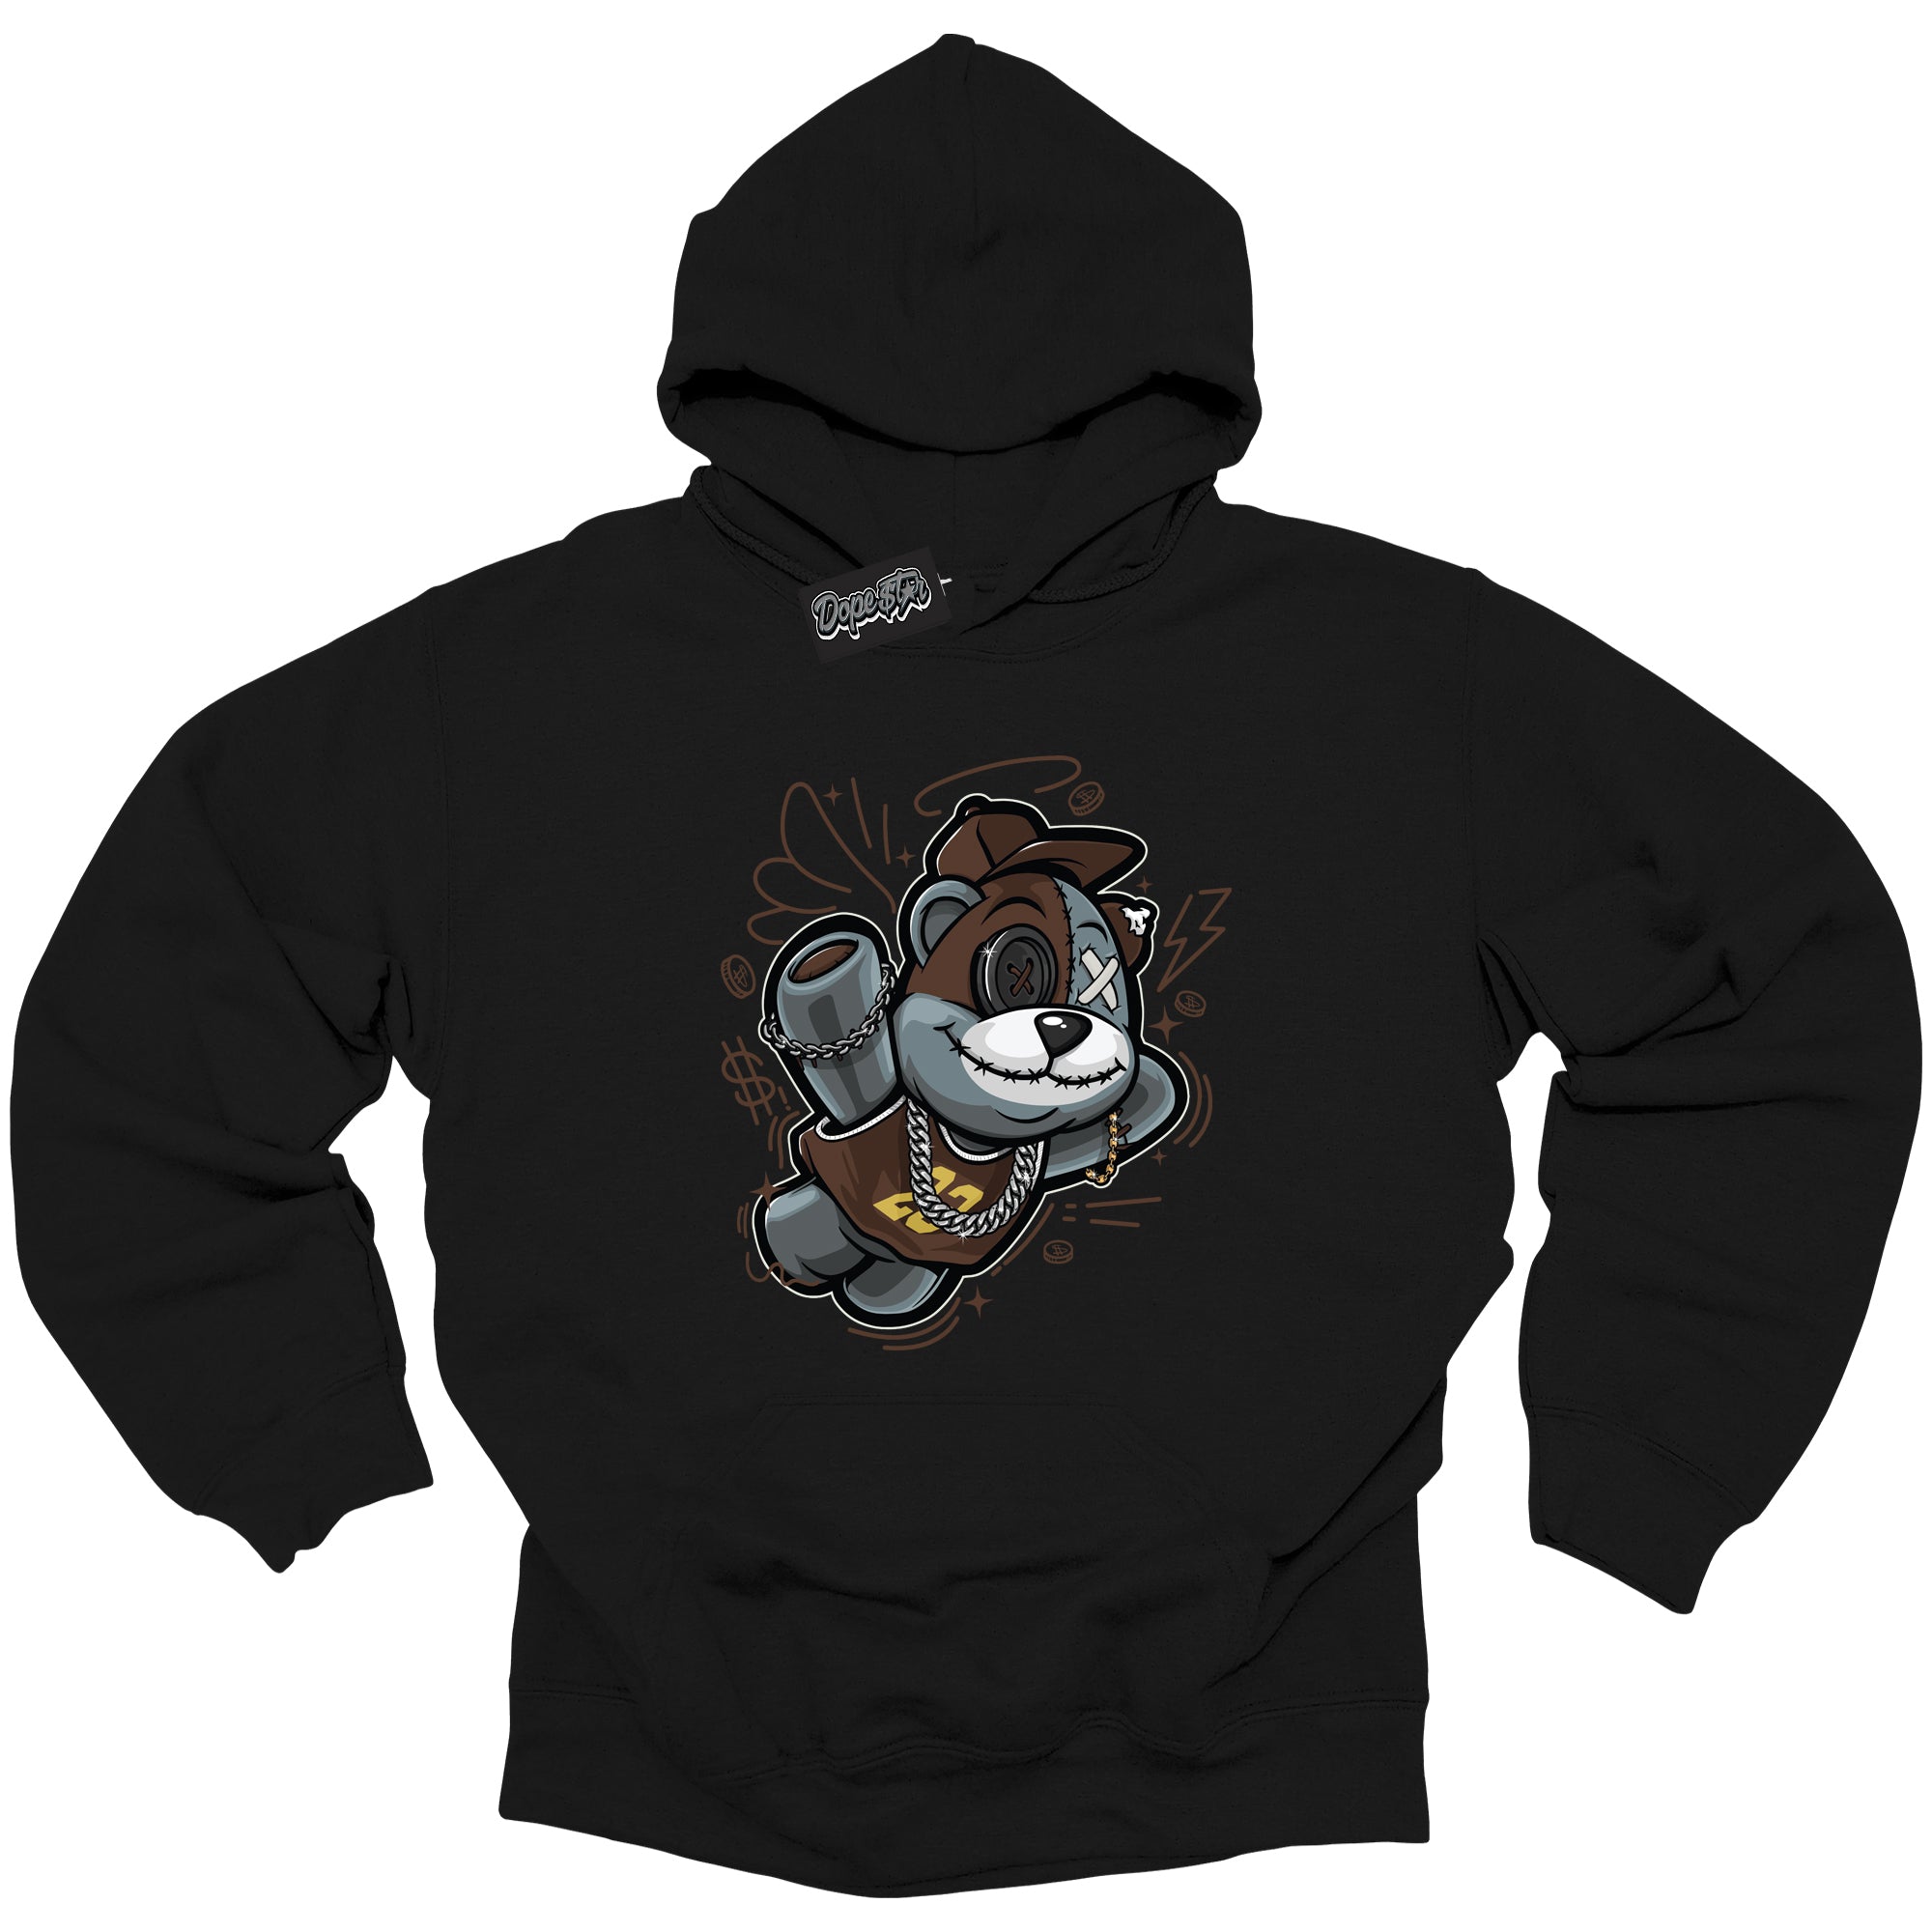 Cool Black Graphic DopeStar Hoodie with “ Slam Dunk Bear “ print, that perfectly matches Palomino 1s sneakers